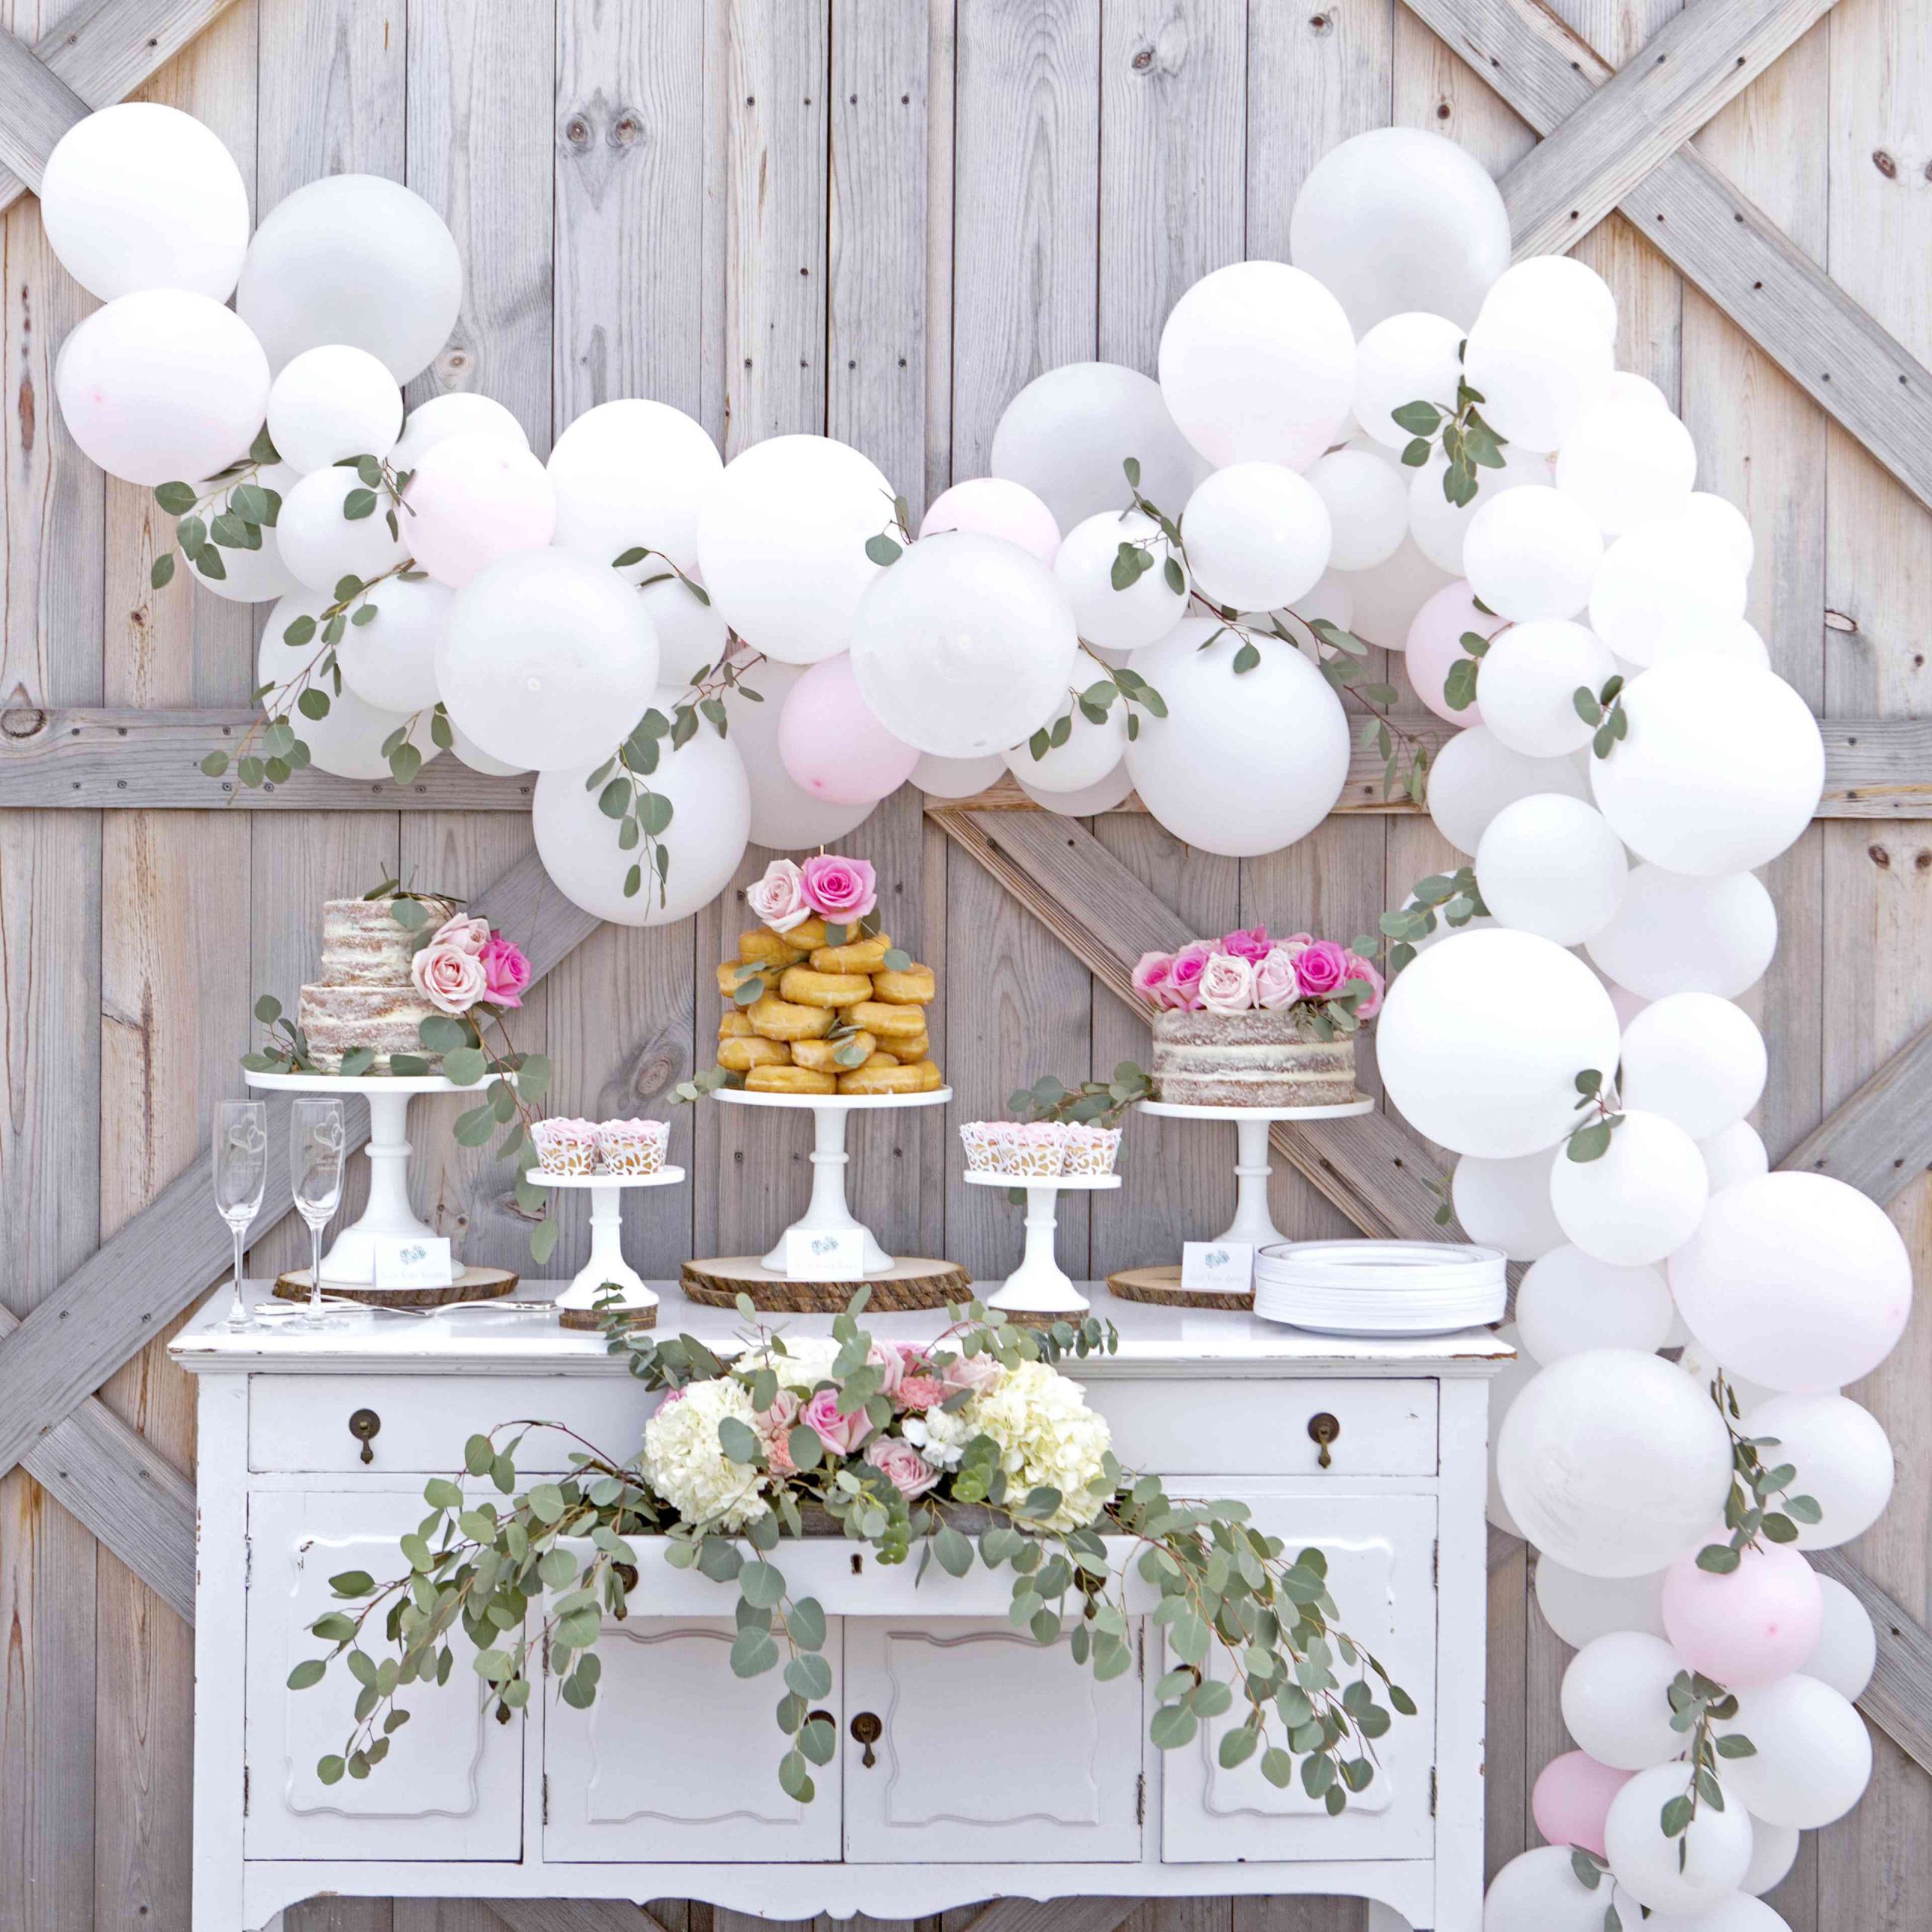 Balloon Decorations For Weddings
 19 Ways To Use Balloons In Your Wedding Decor